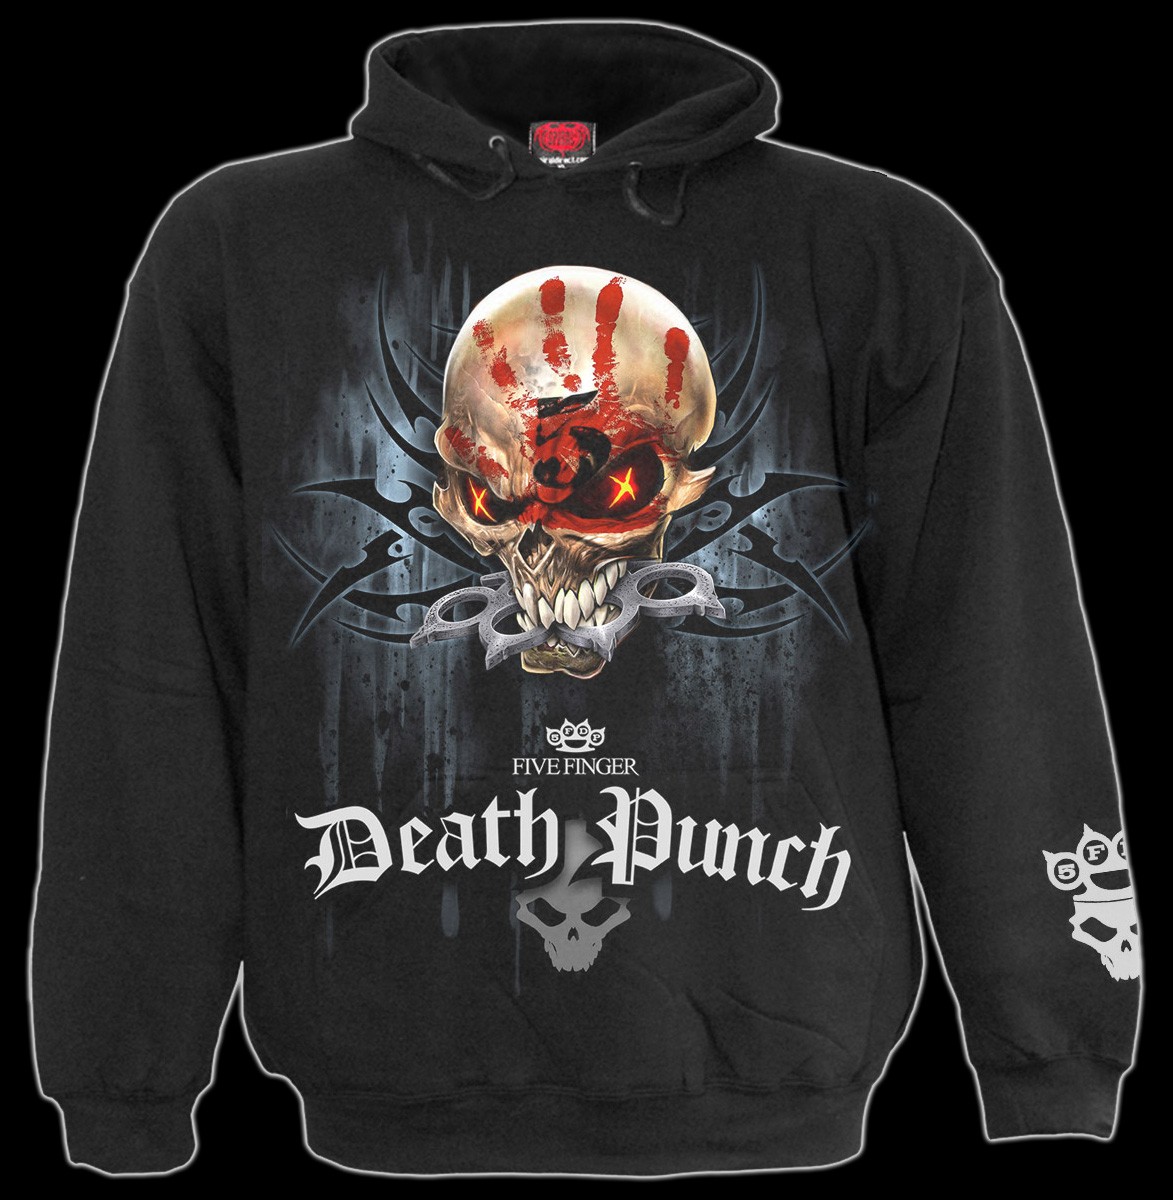 5FDP Game Over Hoody - Five Finger Death Punch